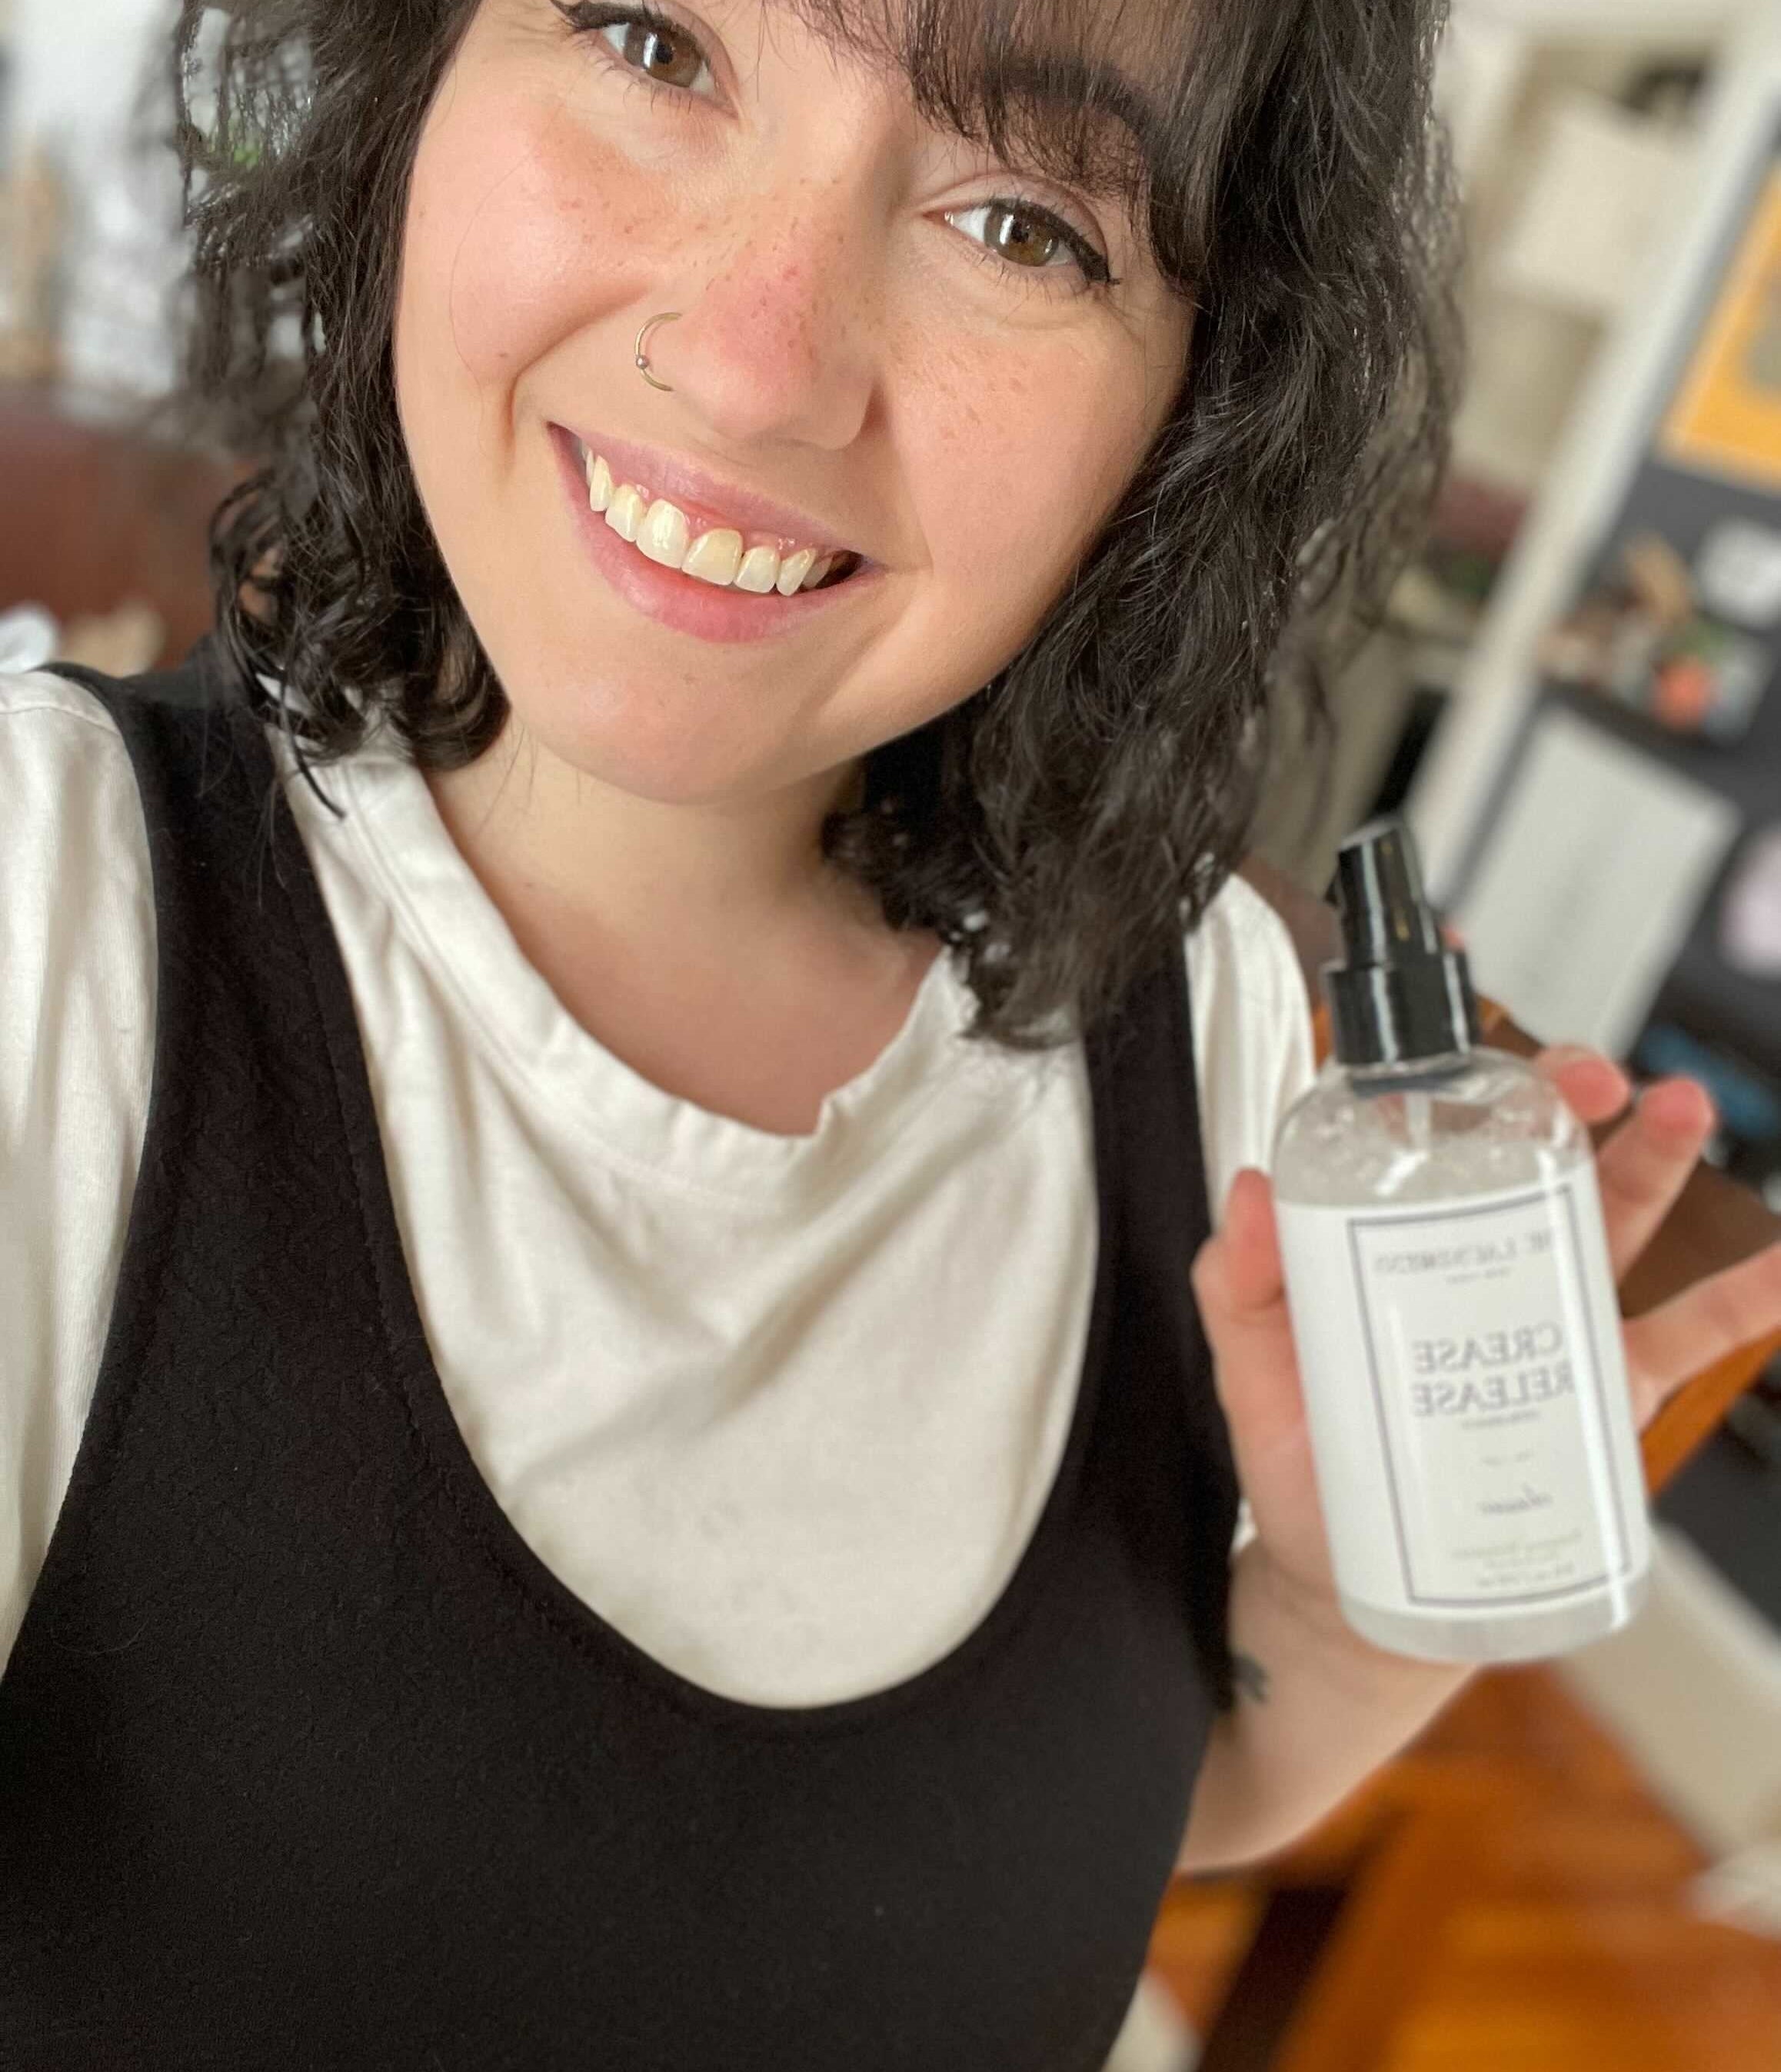 Review: The Laundress Crease Release Spray Really Works